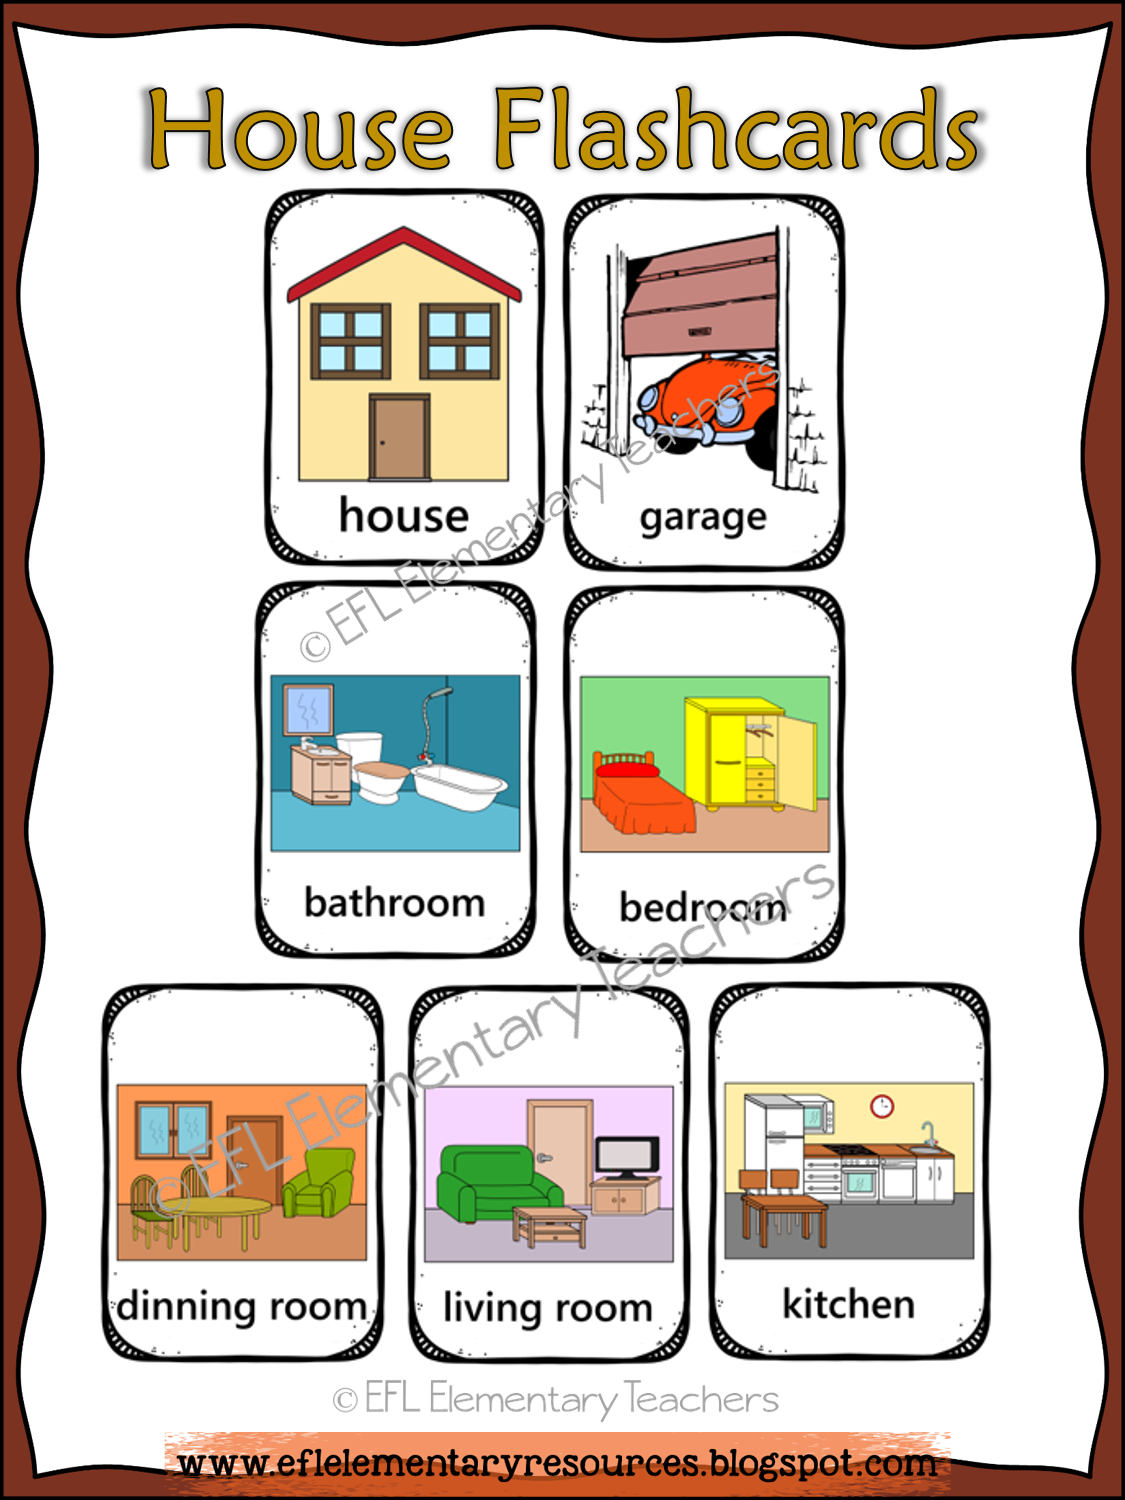 My house pictures. Rooms in the House карточки. Карточки на английском комнаты в доме. Комнаты Worksheets for Kids. Комнаты английский for Kids.